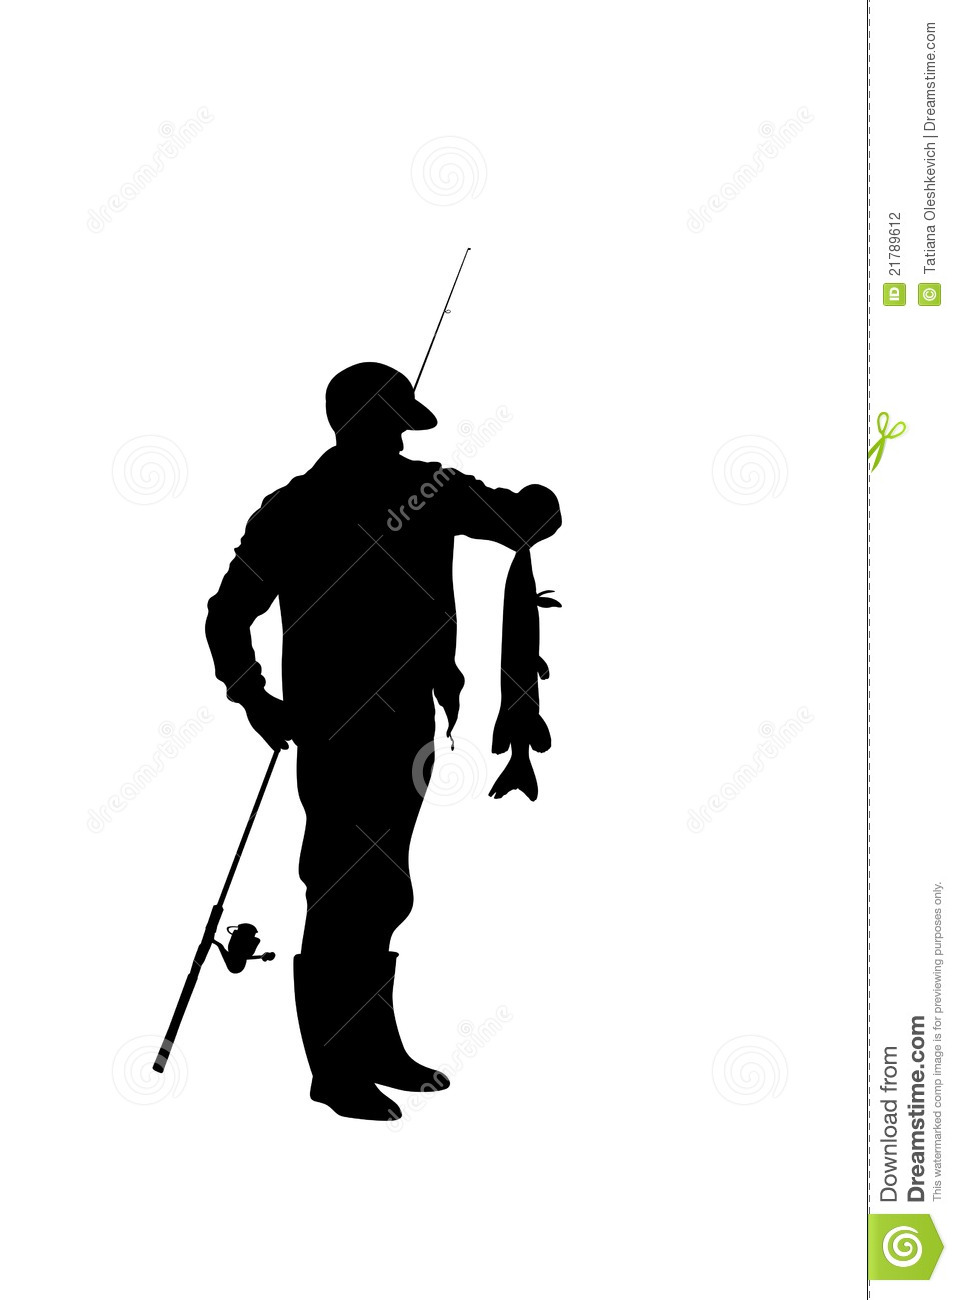 Man Fishing Silhouette   Clipart Panda   Free Clipart Images